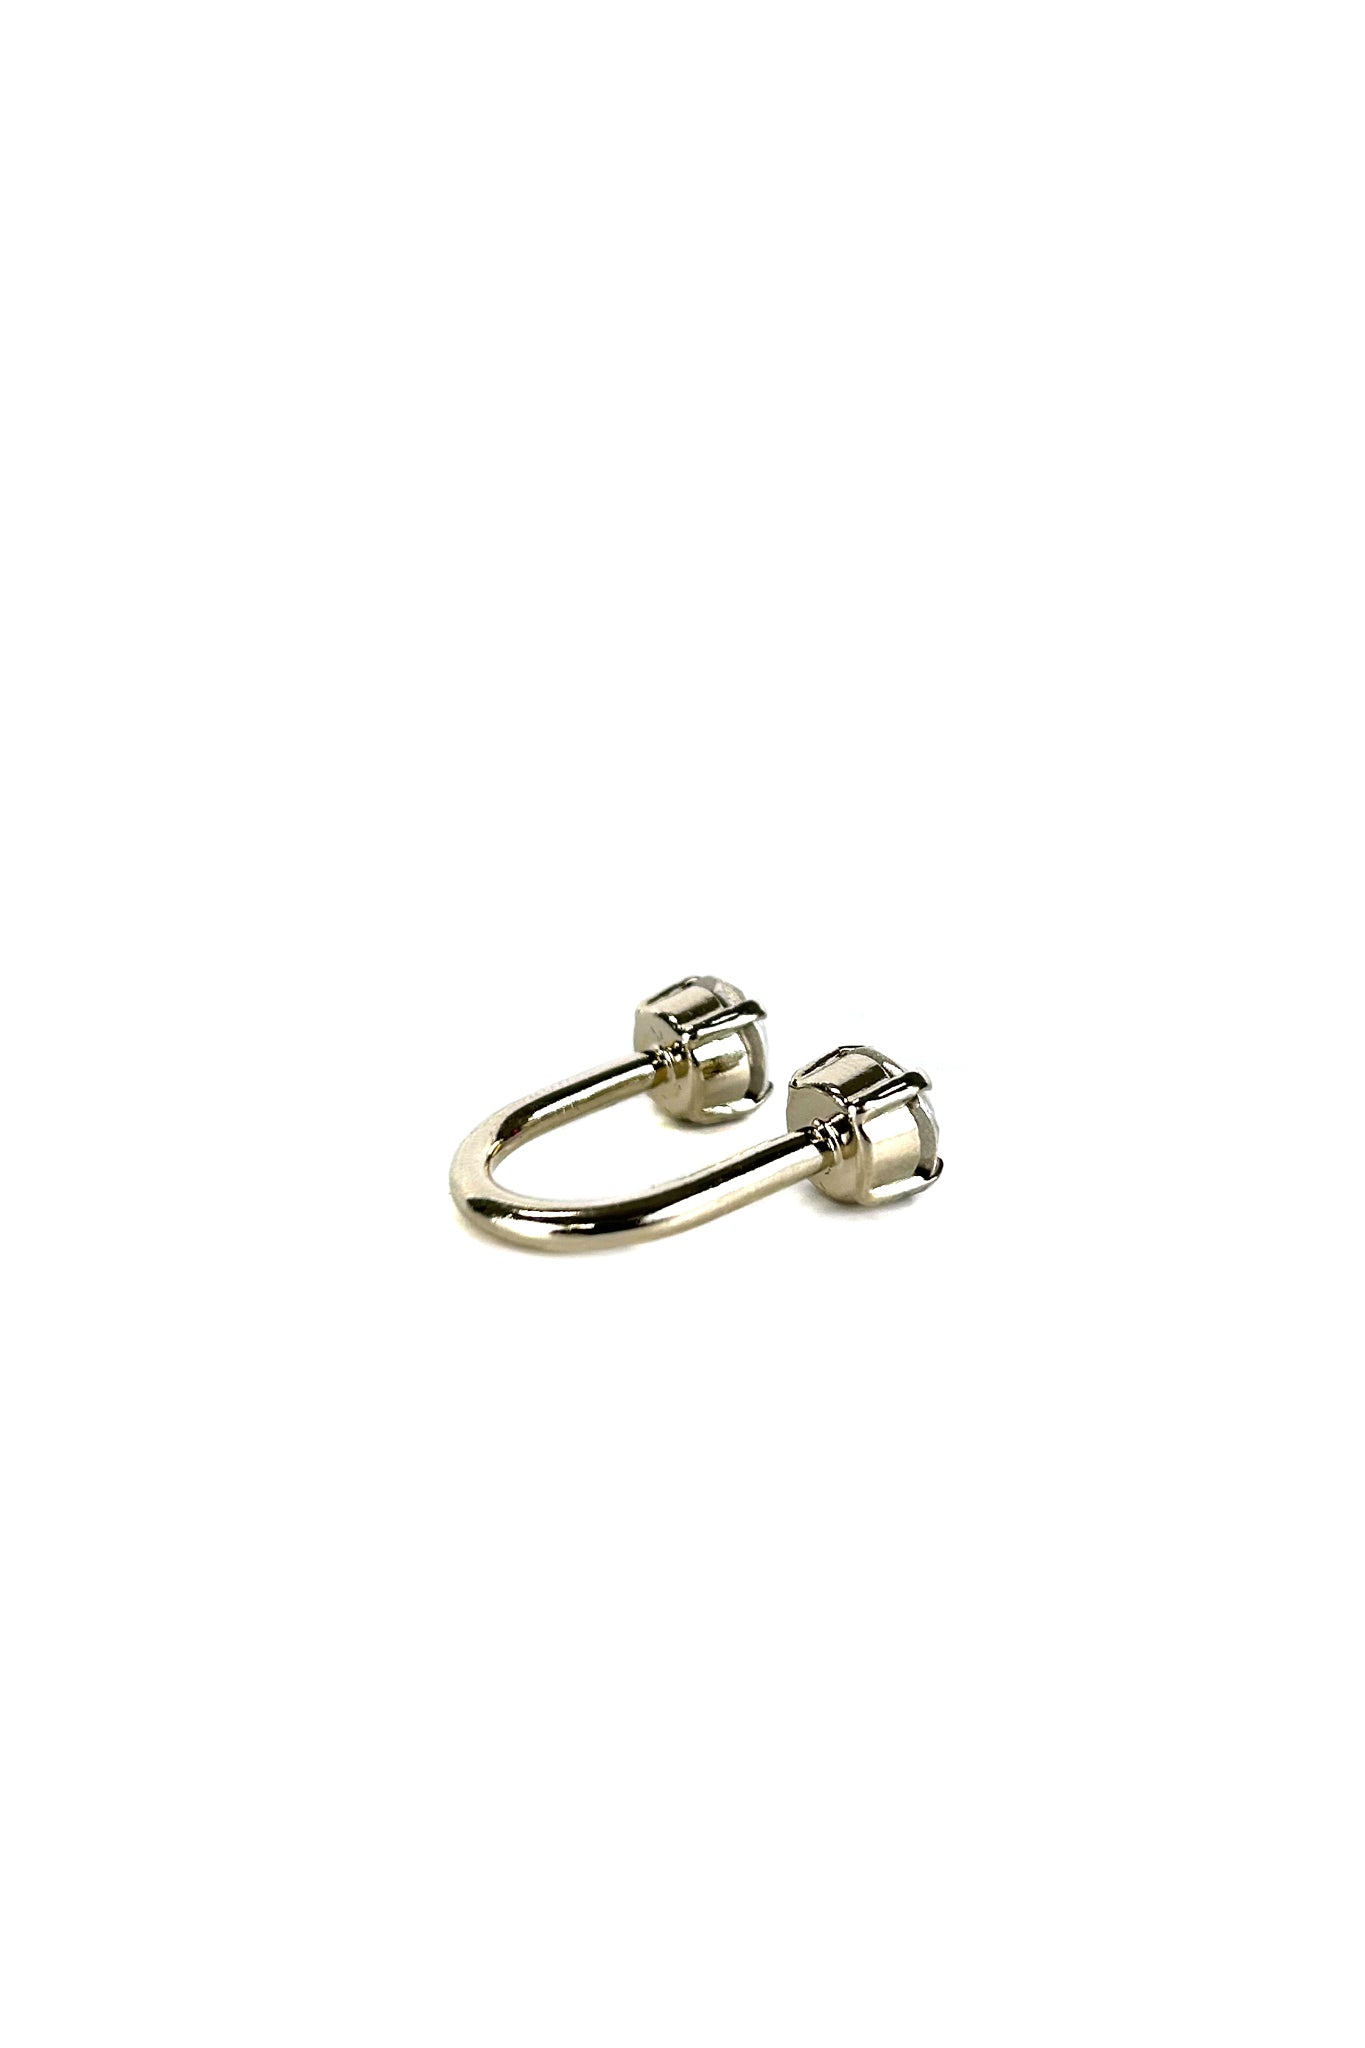 Justine Clenquet Rae Ring, Gold